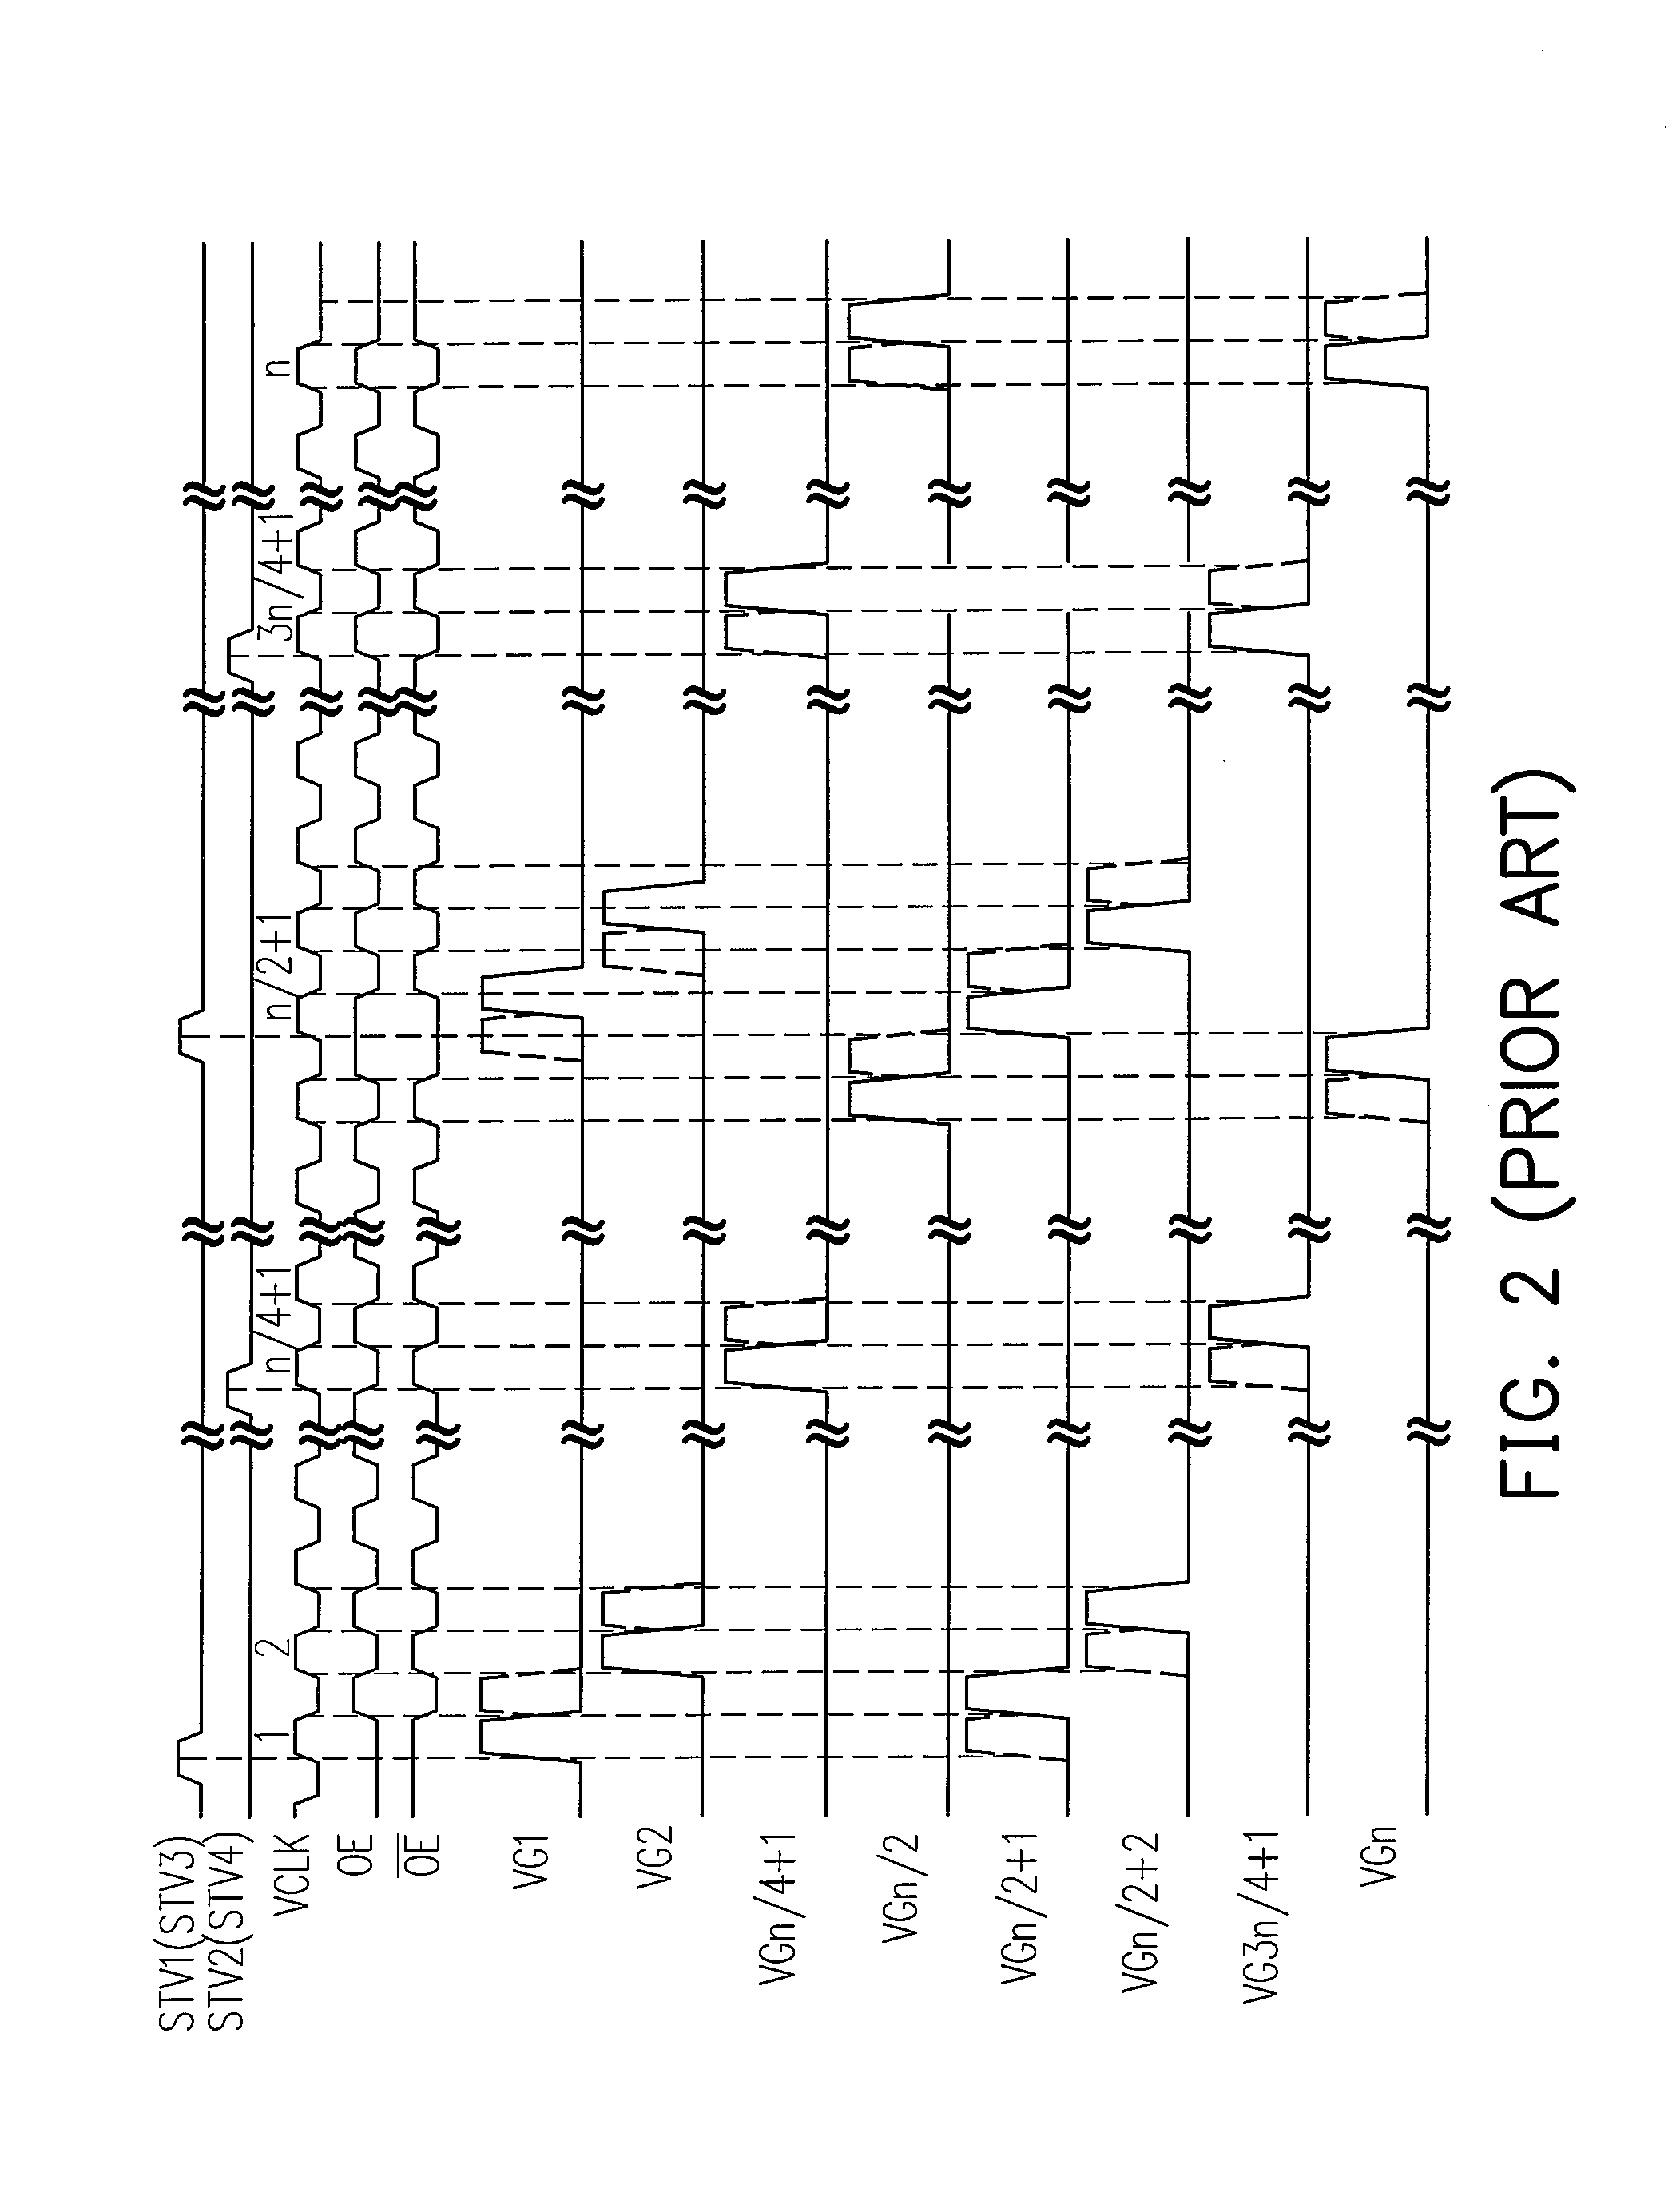 Display apparatus and method for driving display panel thereof